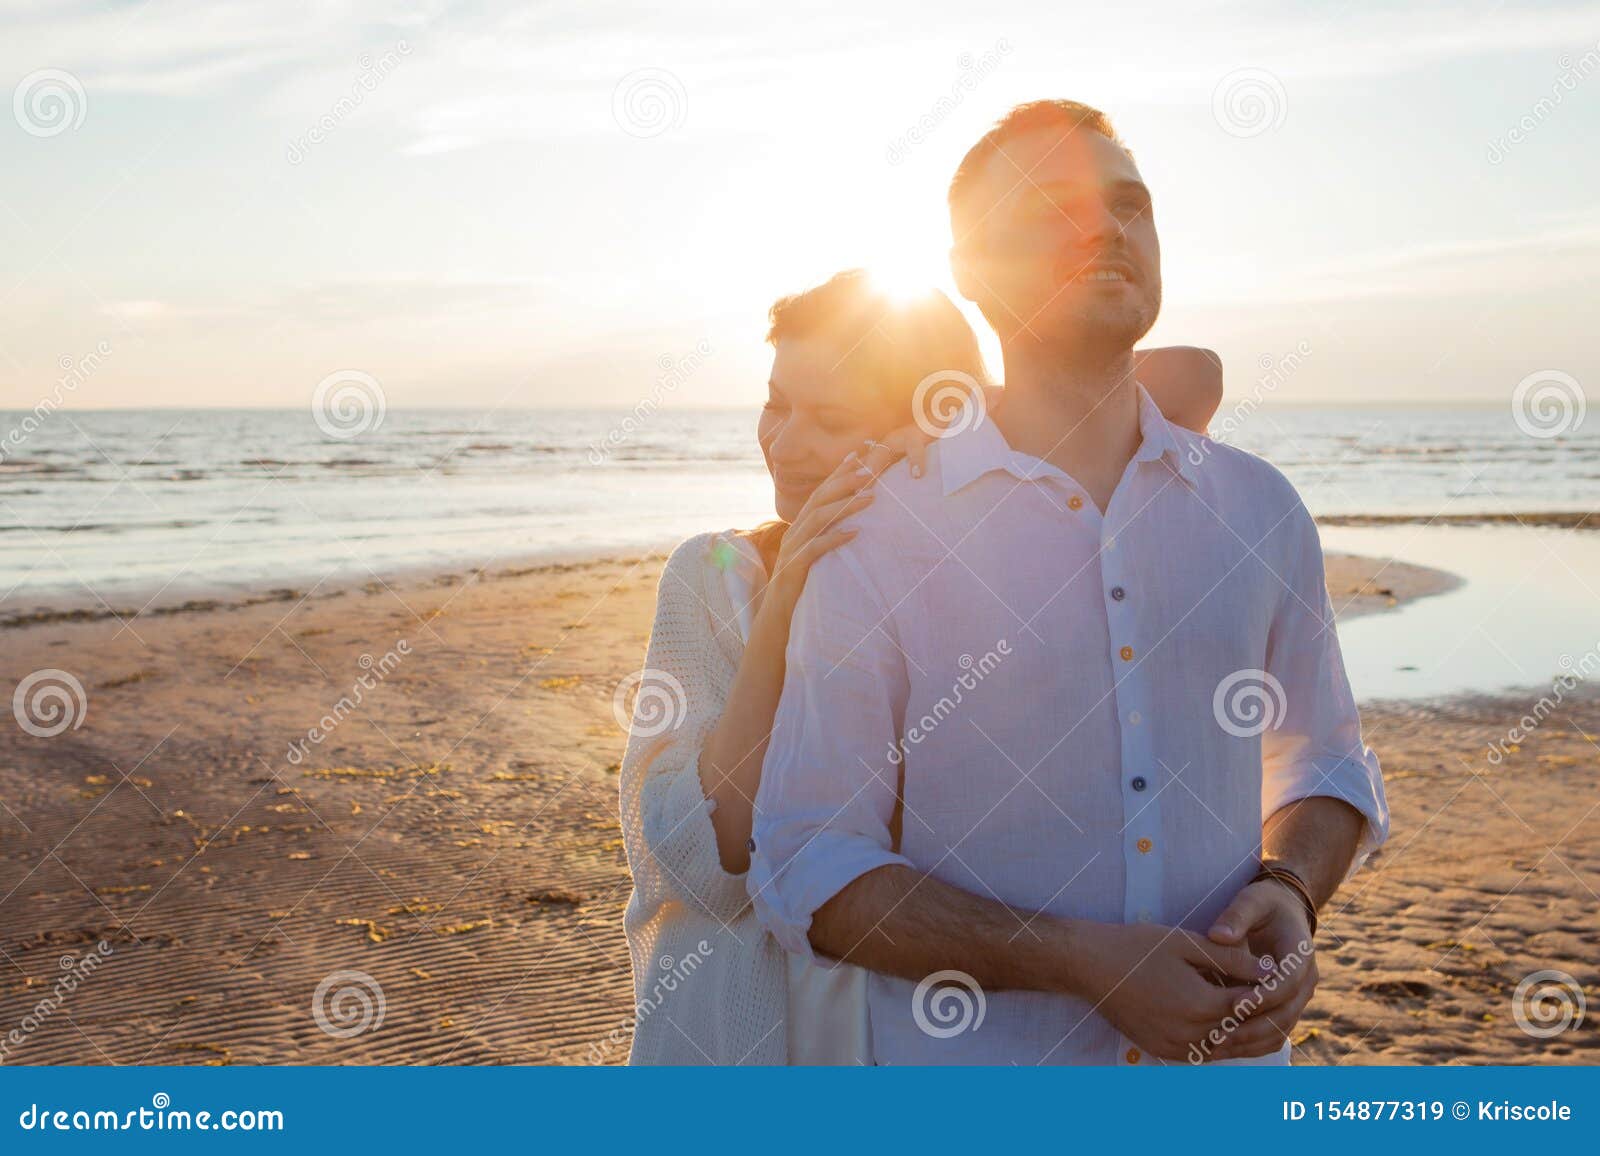 Sea of Tranquility. a Happy Couple is Embracing Tenderly Against the